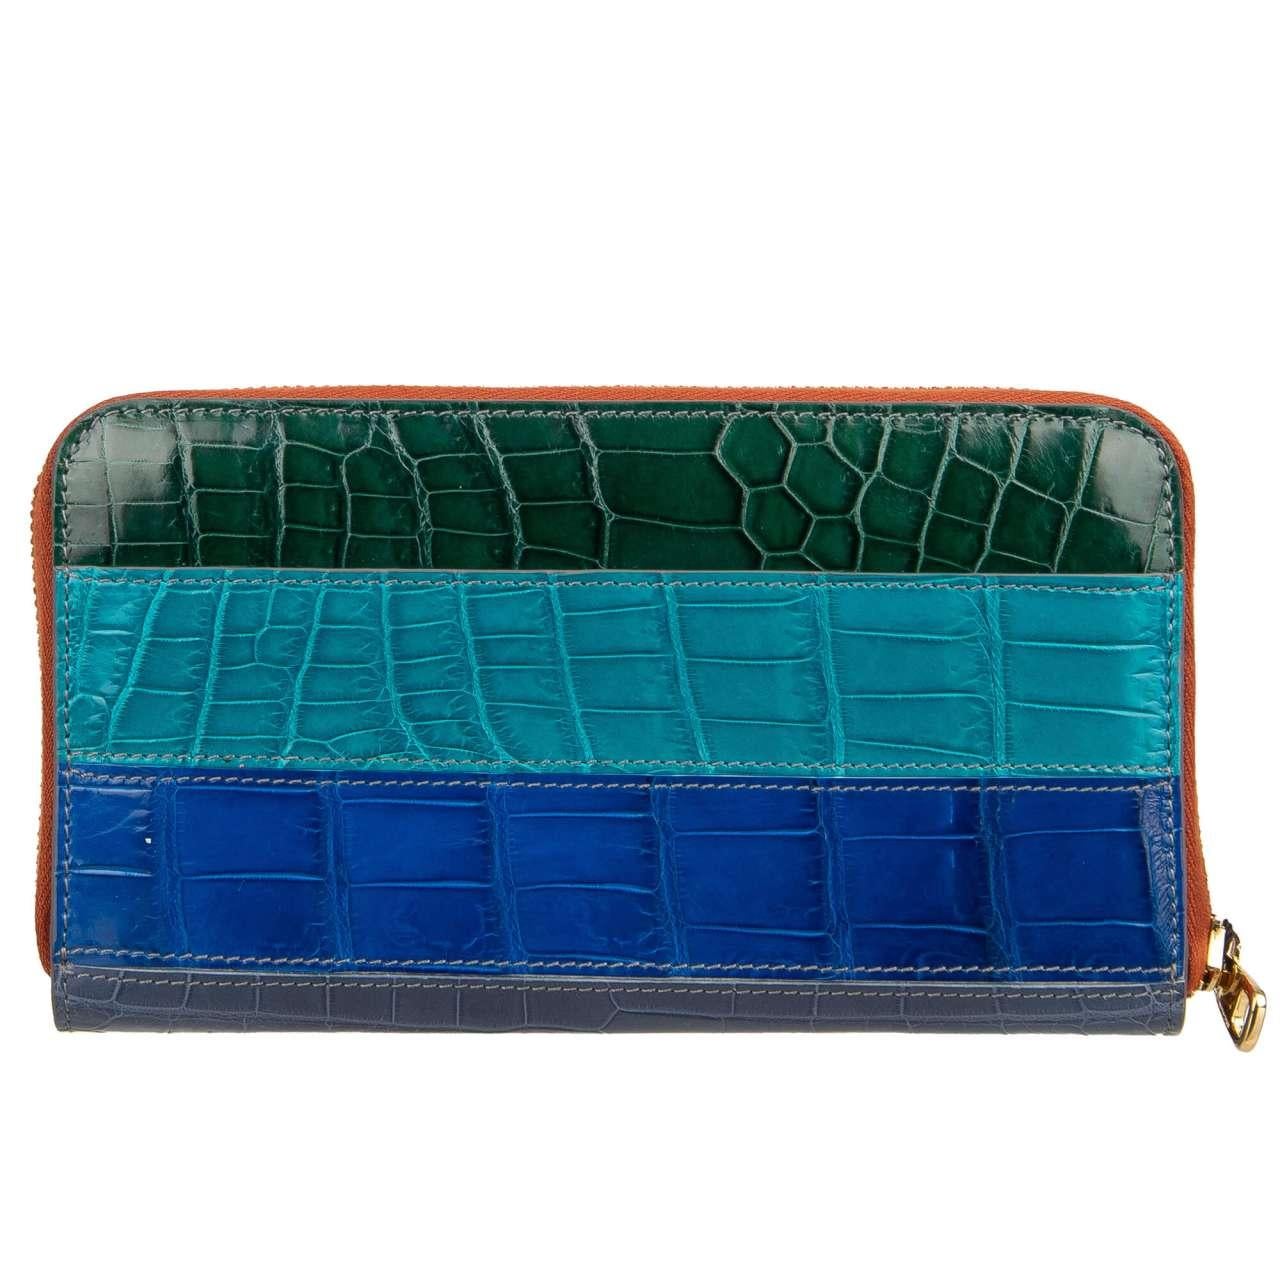 - Striped Crocodile Leather Patchwork Zip-Around wallet with logo plate in green and blue by DOLCE & GABBANA - New with Tag - MADE IN ITALY - Former RRP: EUR 2,350 - Model: BI0473-B251R-S9000 - Material: 100% Crocodile Leather (Coccodrillo) - Metal